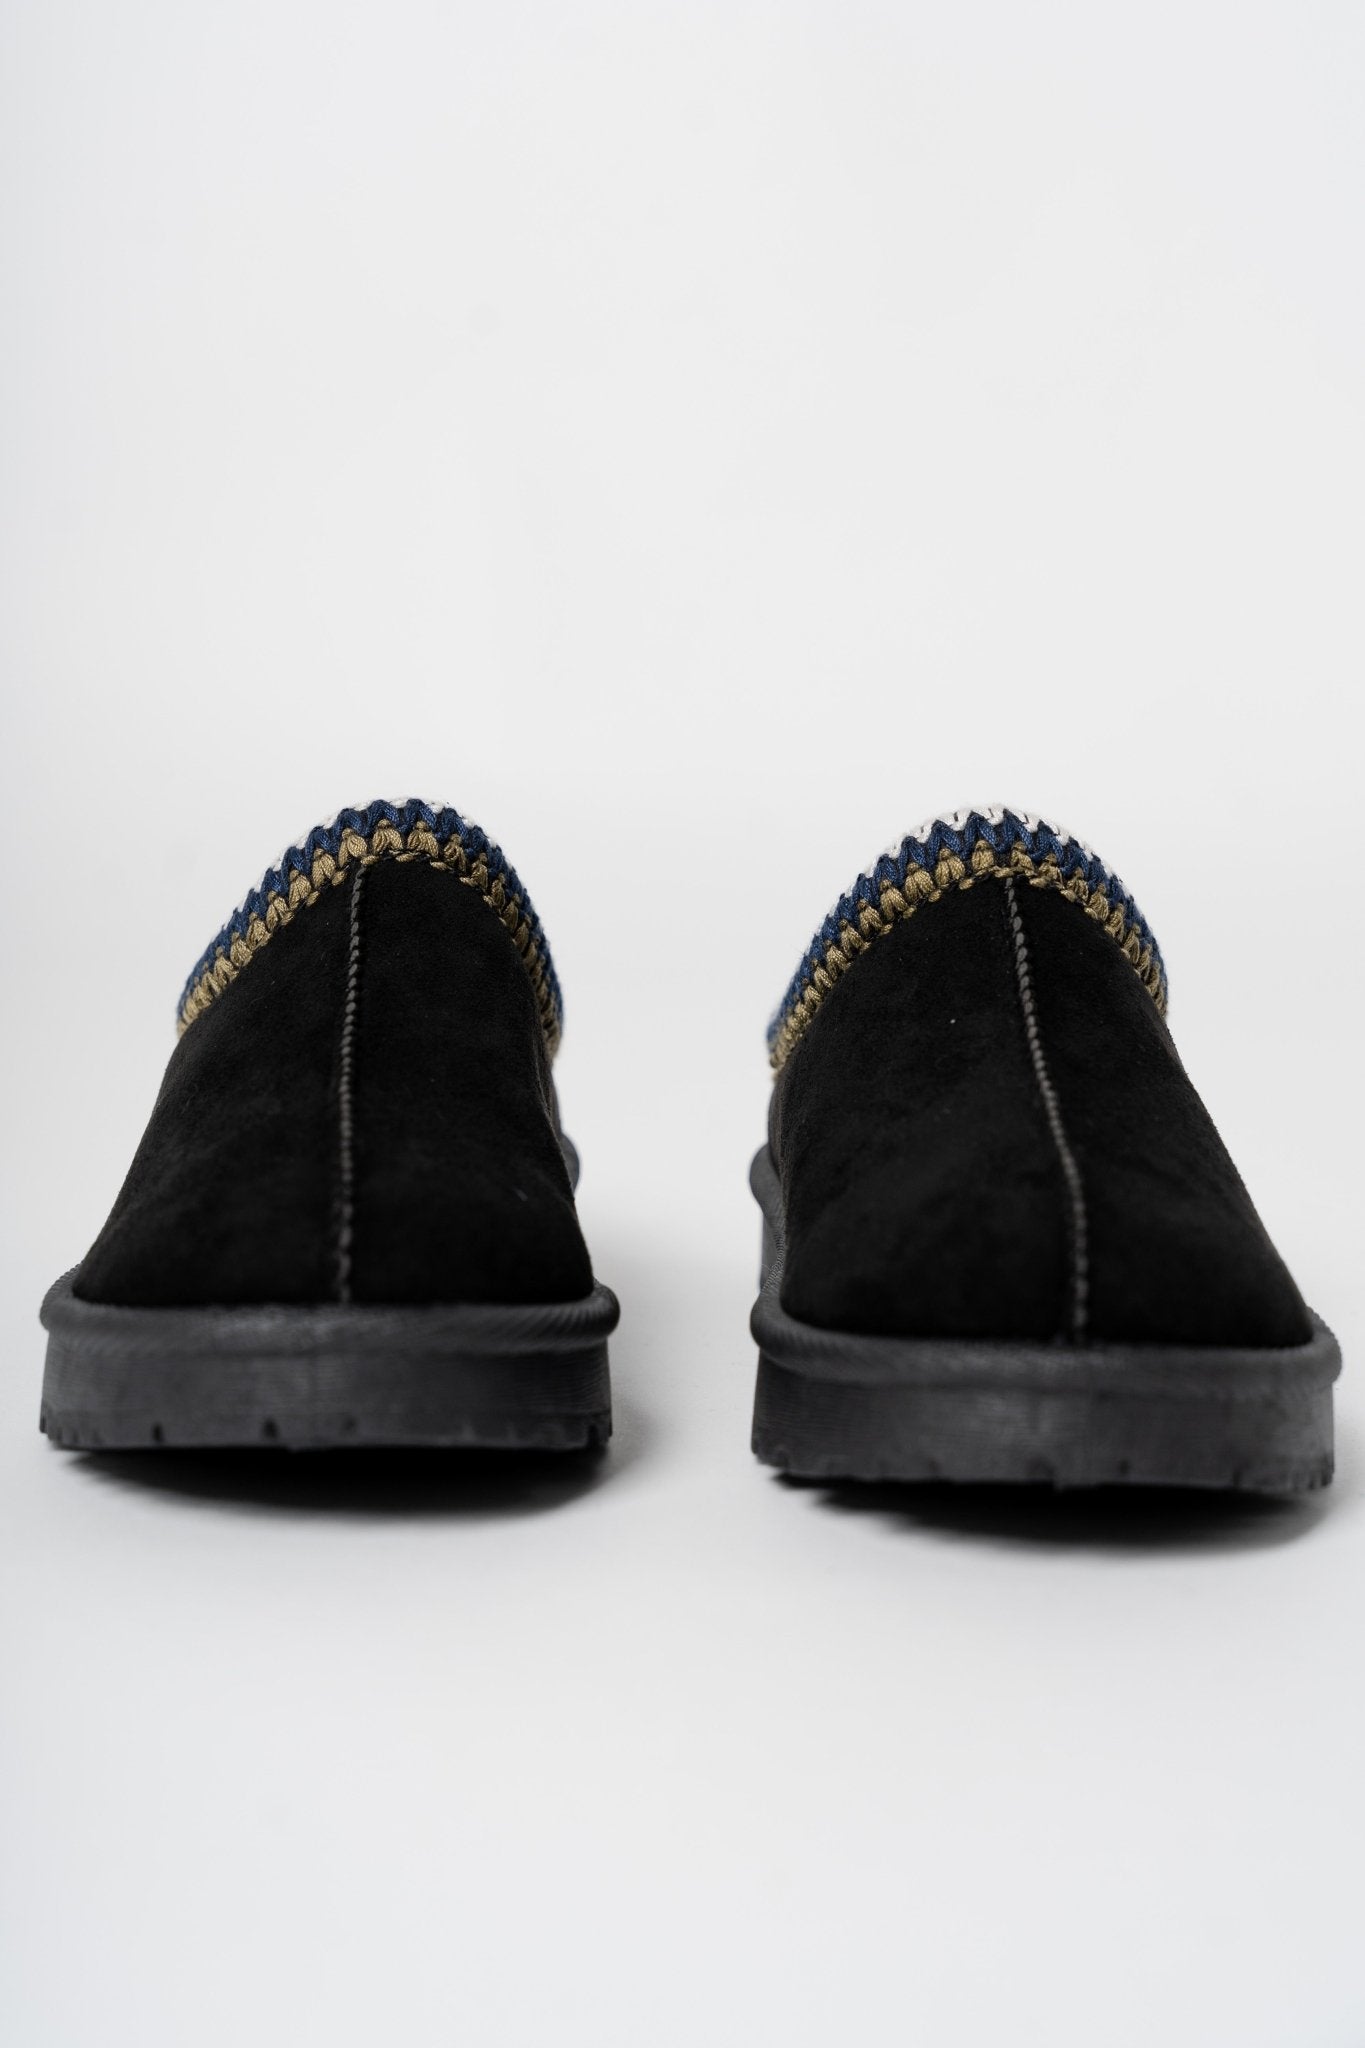 Zen stitched slippers black - Trendy shoes - Fashion Shoes at Lush Fashion Lounge Boutique in Oklahoma City